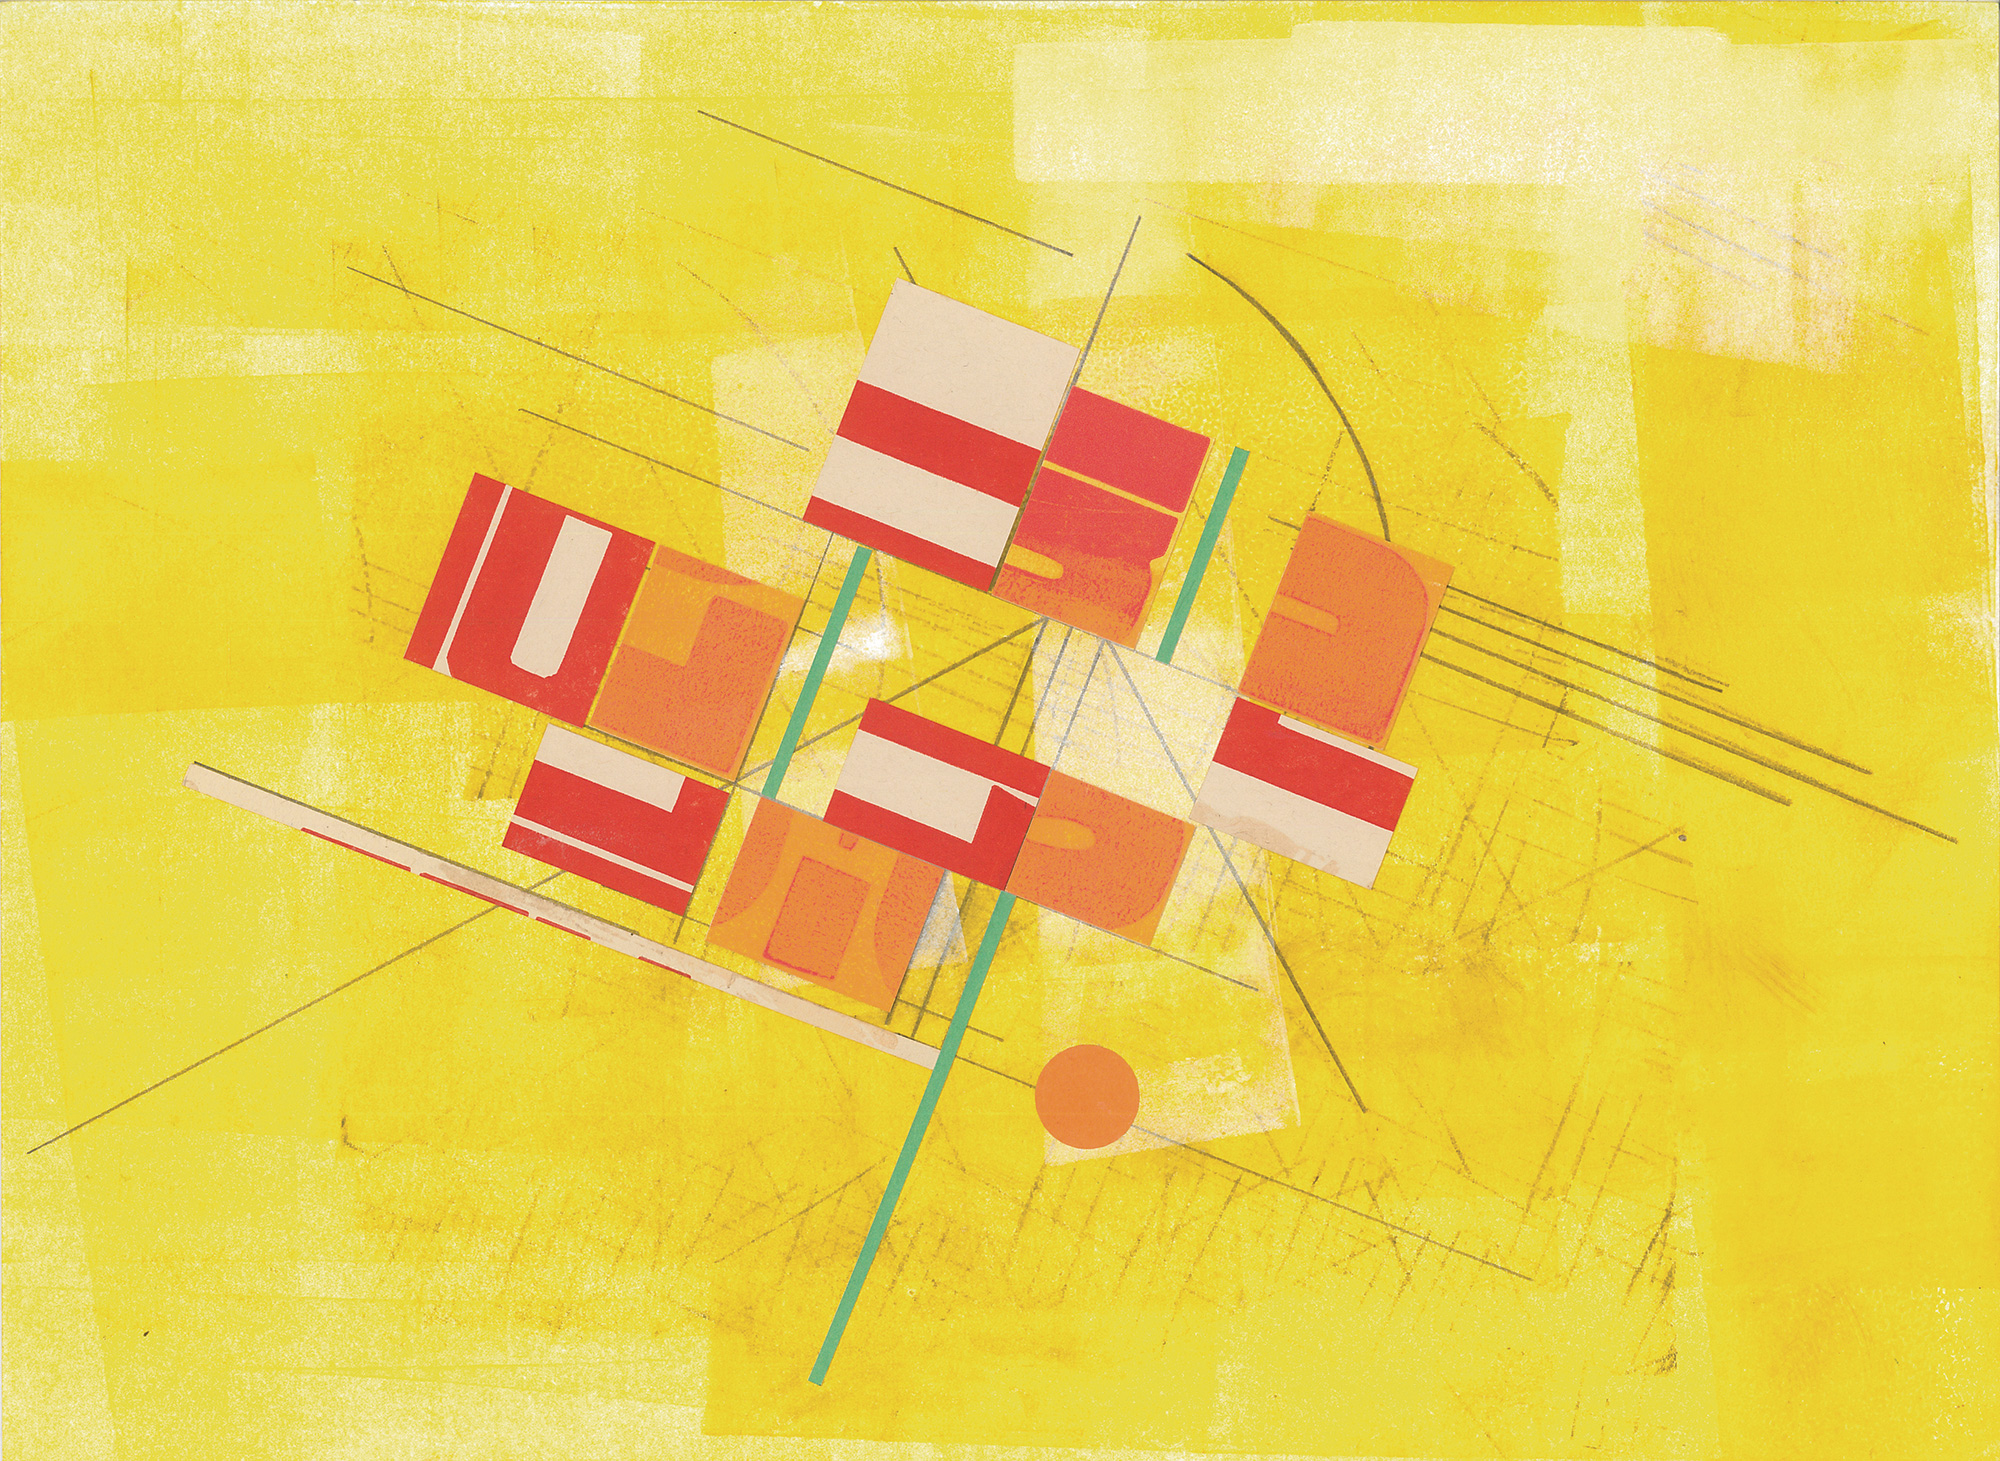 This is a graphic work on paper. The composition is dominated by a bright yellow color which fills the page. Through the transparent yellow ink, the white of the paper shows through, along with faint grids of intersecting graphite lines. Collaged over the yellow, and grouped in the center of the page, are several blocky red and orange shapes that appear to be cropped segments of letters. These red and orange shapes are held in place by more graphite lines and three thin green lines. The artist has provided this poetic description of his work: In *B.*, there is a central concentration of yellow, an excerpt of orange, and portions of large red texts. Not whole words. And three parallel lines of a sea-foam green. Everything else here is tight graphite lines as if we are with the remnants of a ledger or a blueprint.